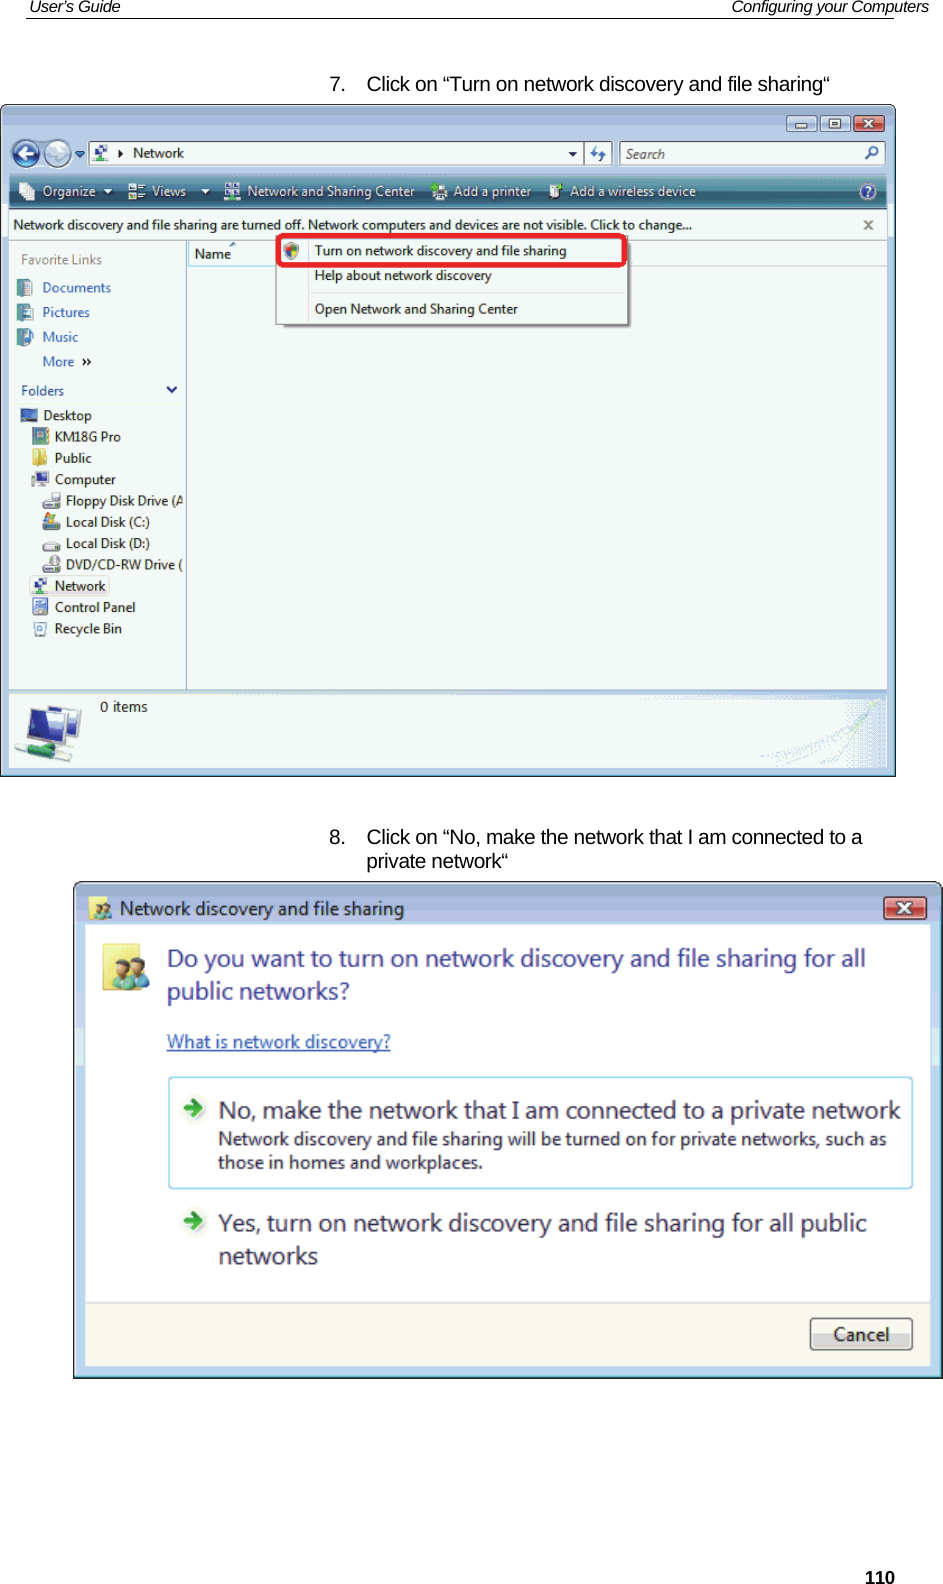 User’s Guide   Configuring your Computers  1107.  Click on “Turn on network discovery and file sharing“   8.  Click on “No, make the network that I am connected to a private network“      